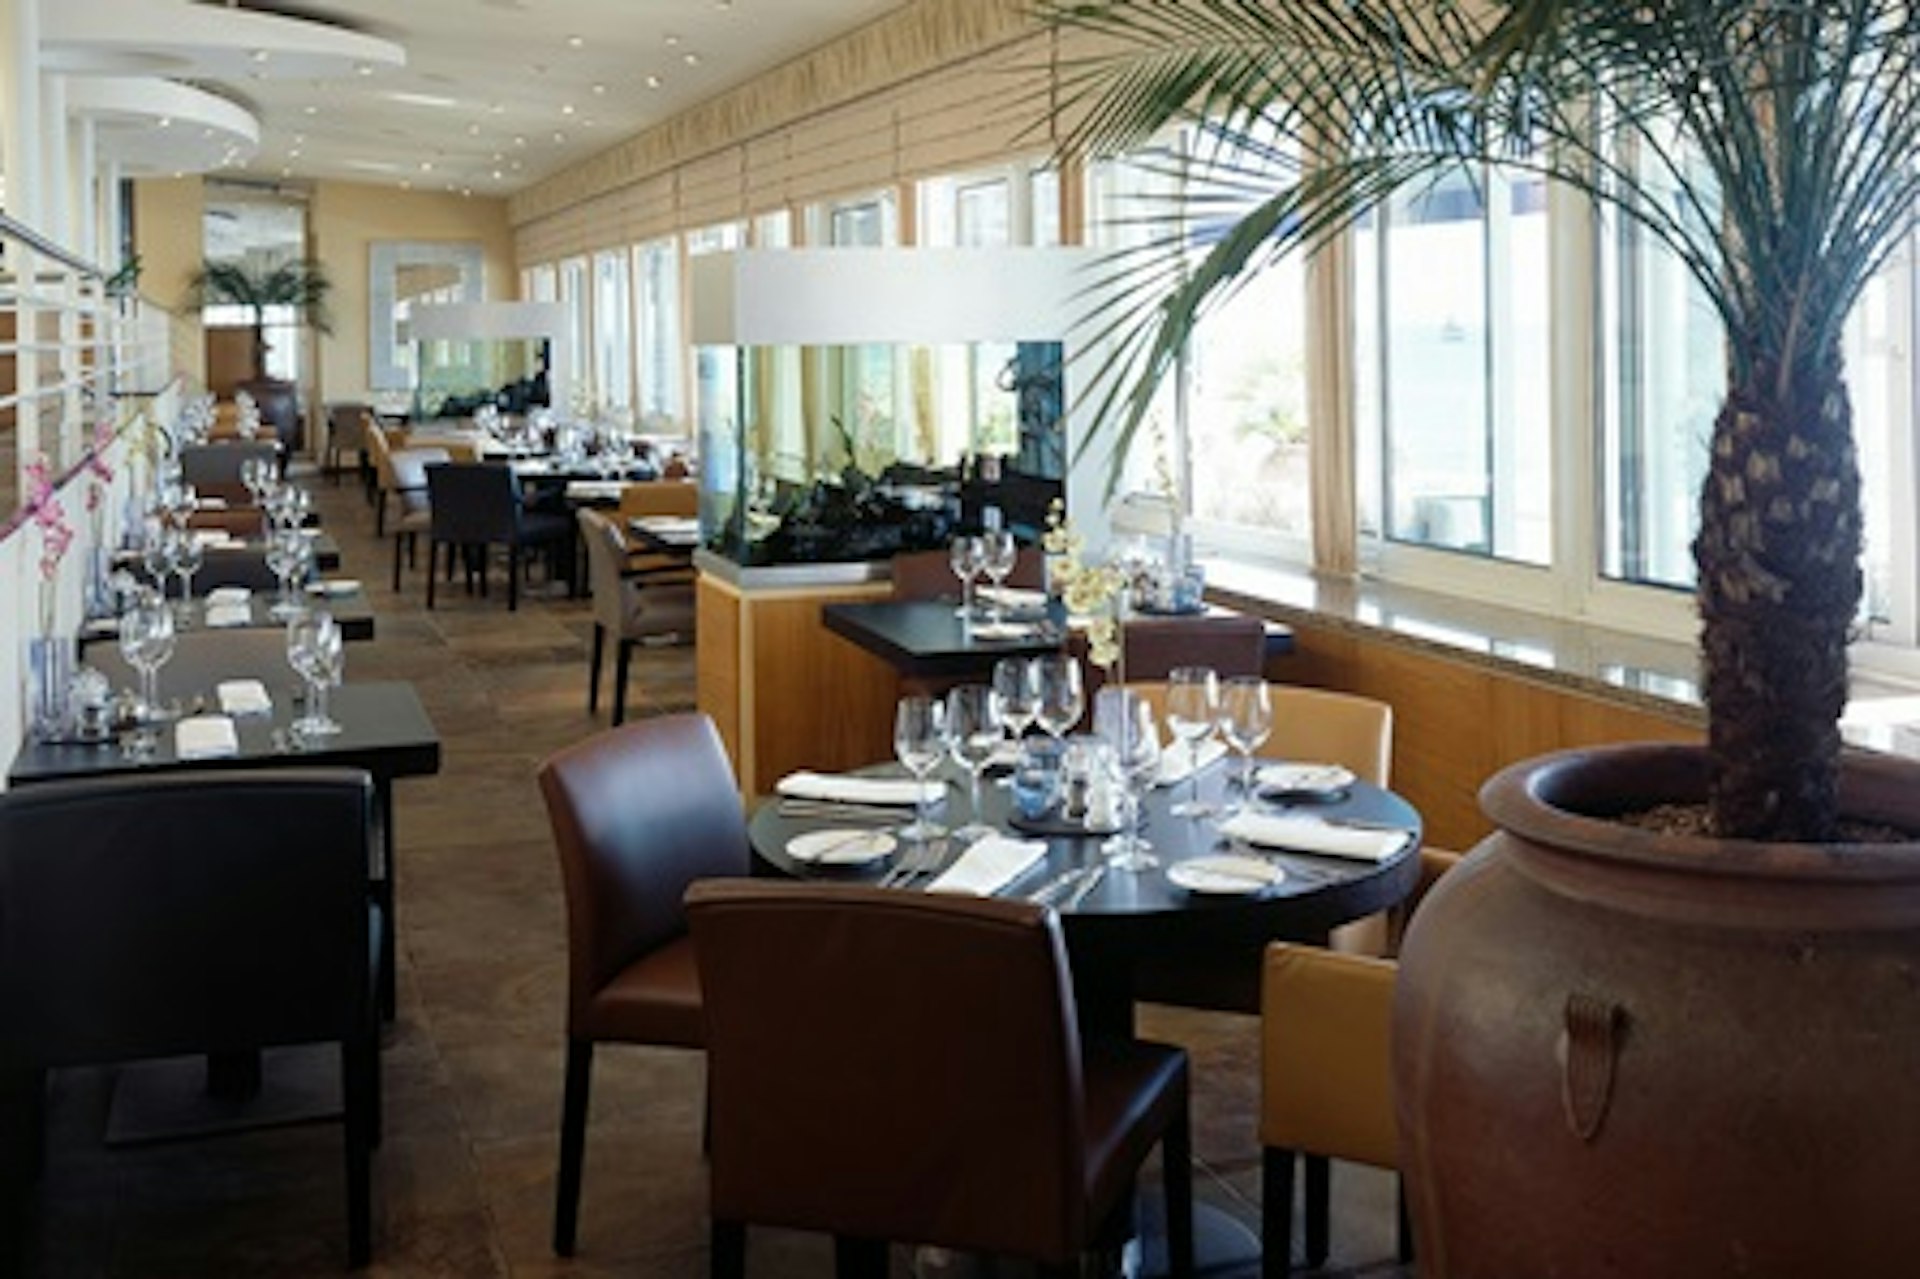 One Night Coastal Break for Two at The 4* Haven Hotel, Sandbanks 4